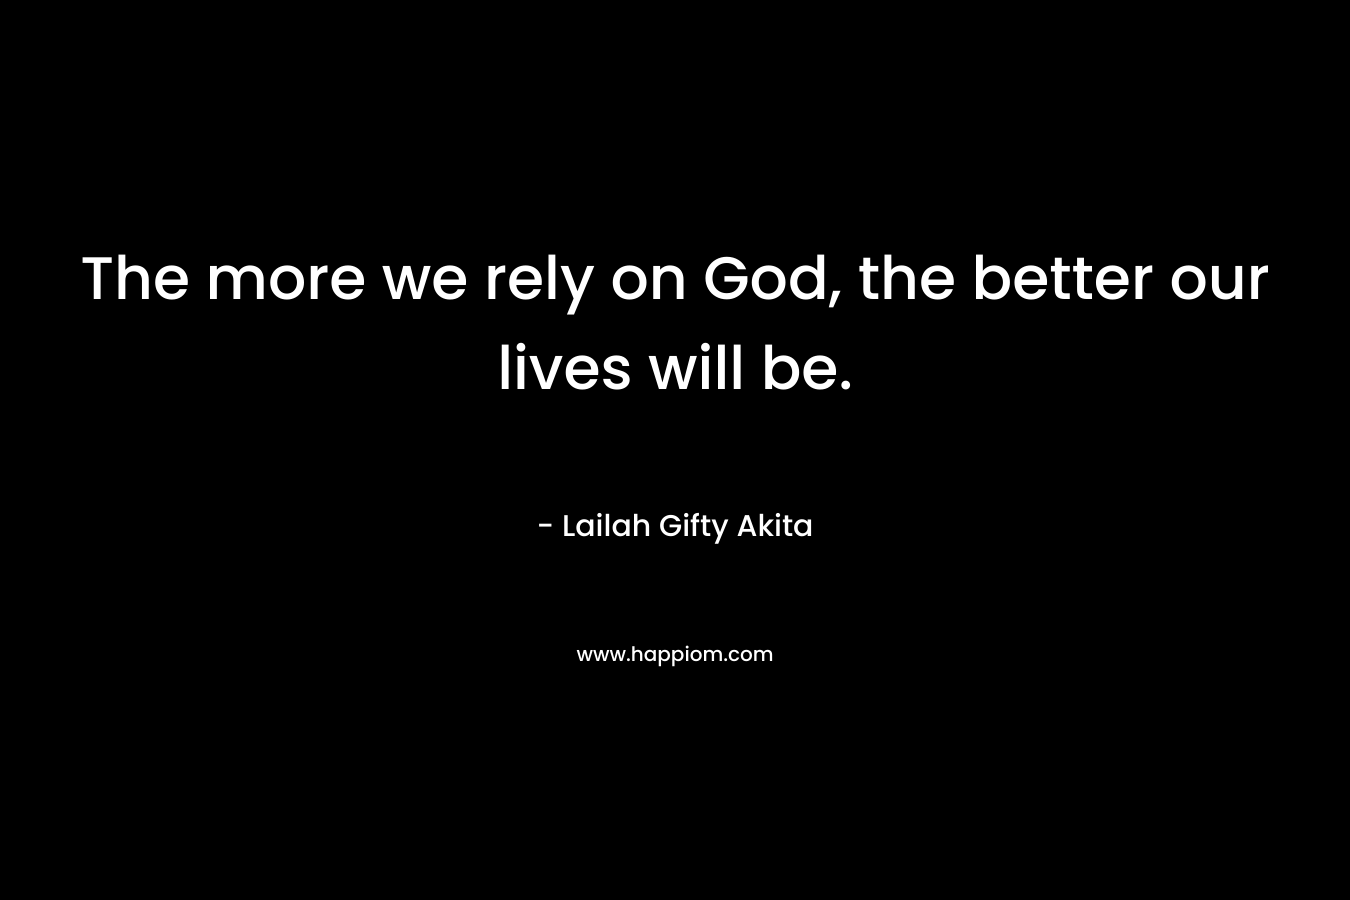 The more we rely on God, the better our lives will be.